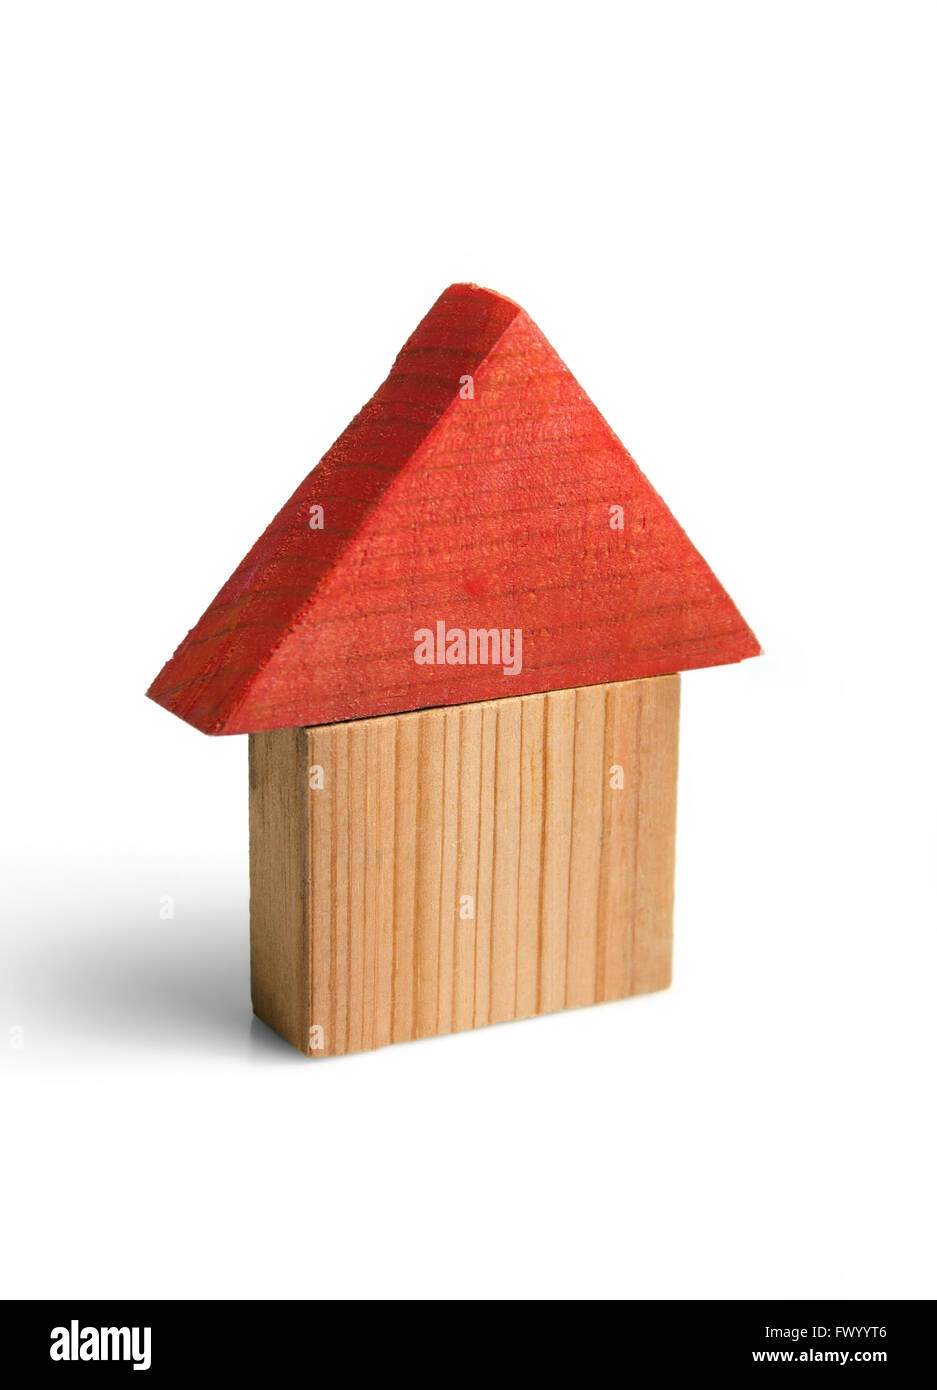 Wooden house model, symbol of real estate business. Stock Photo